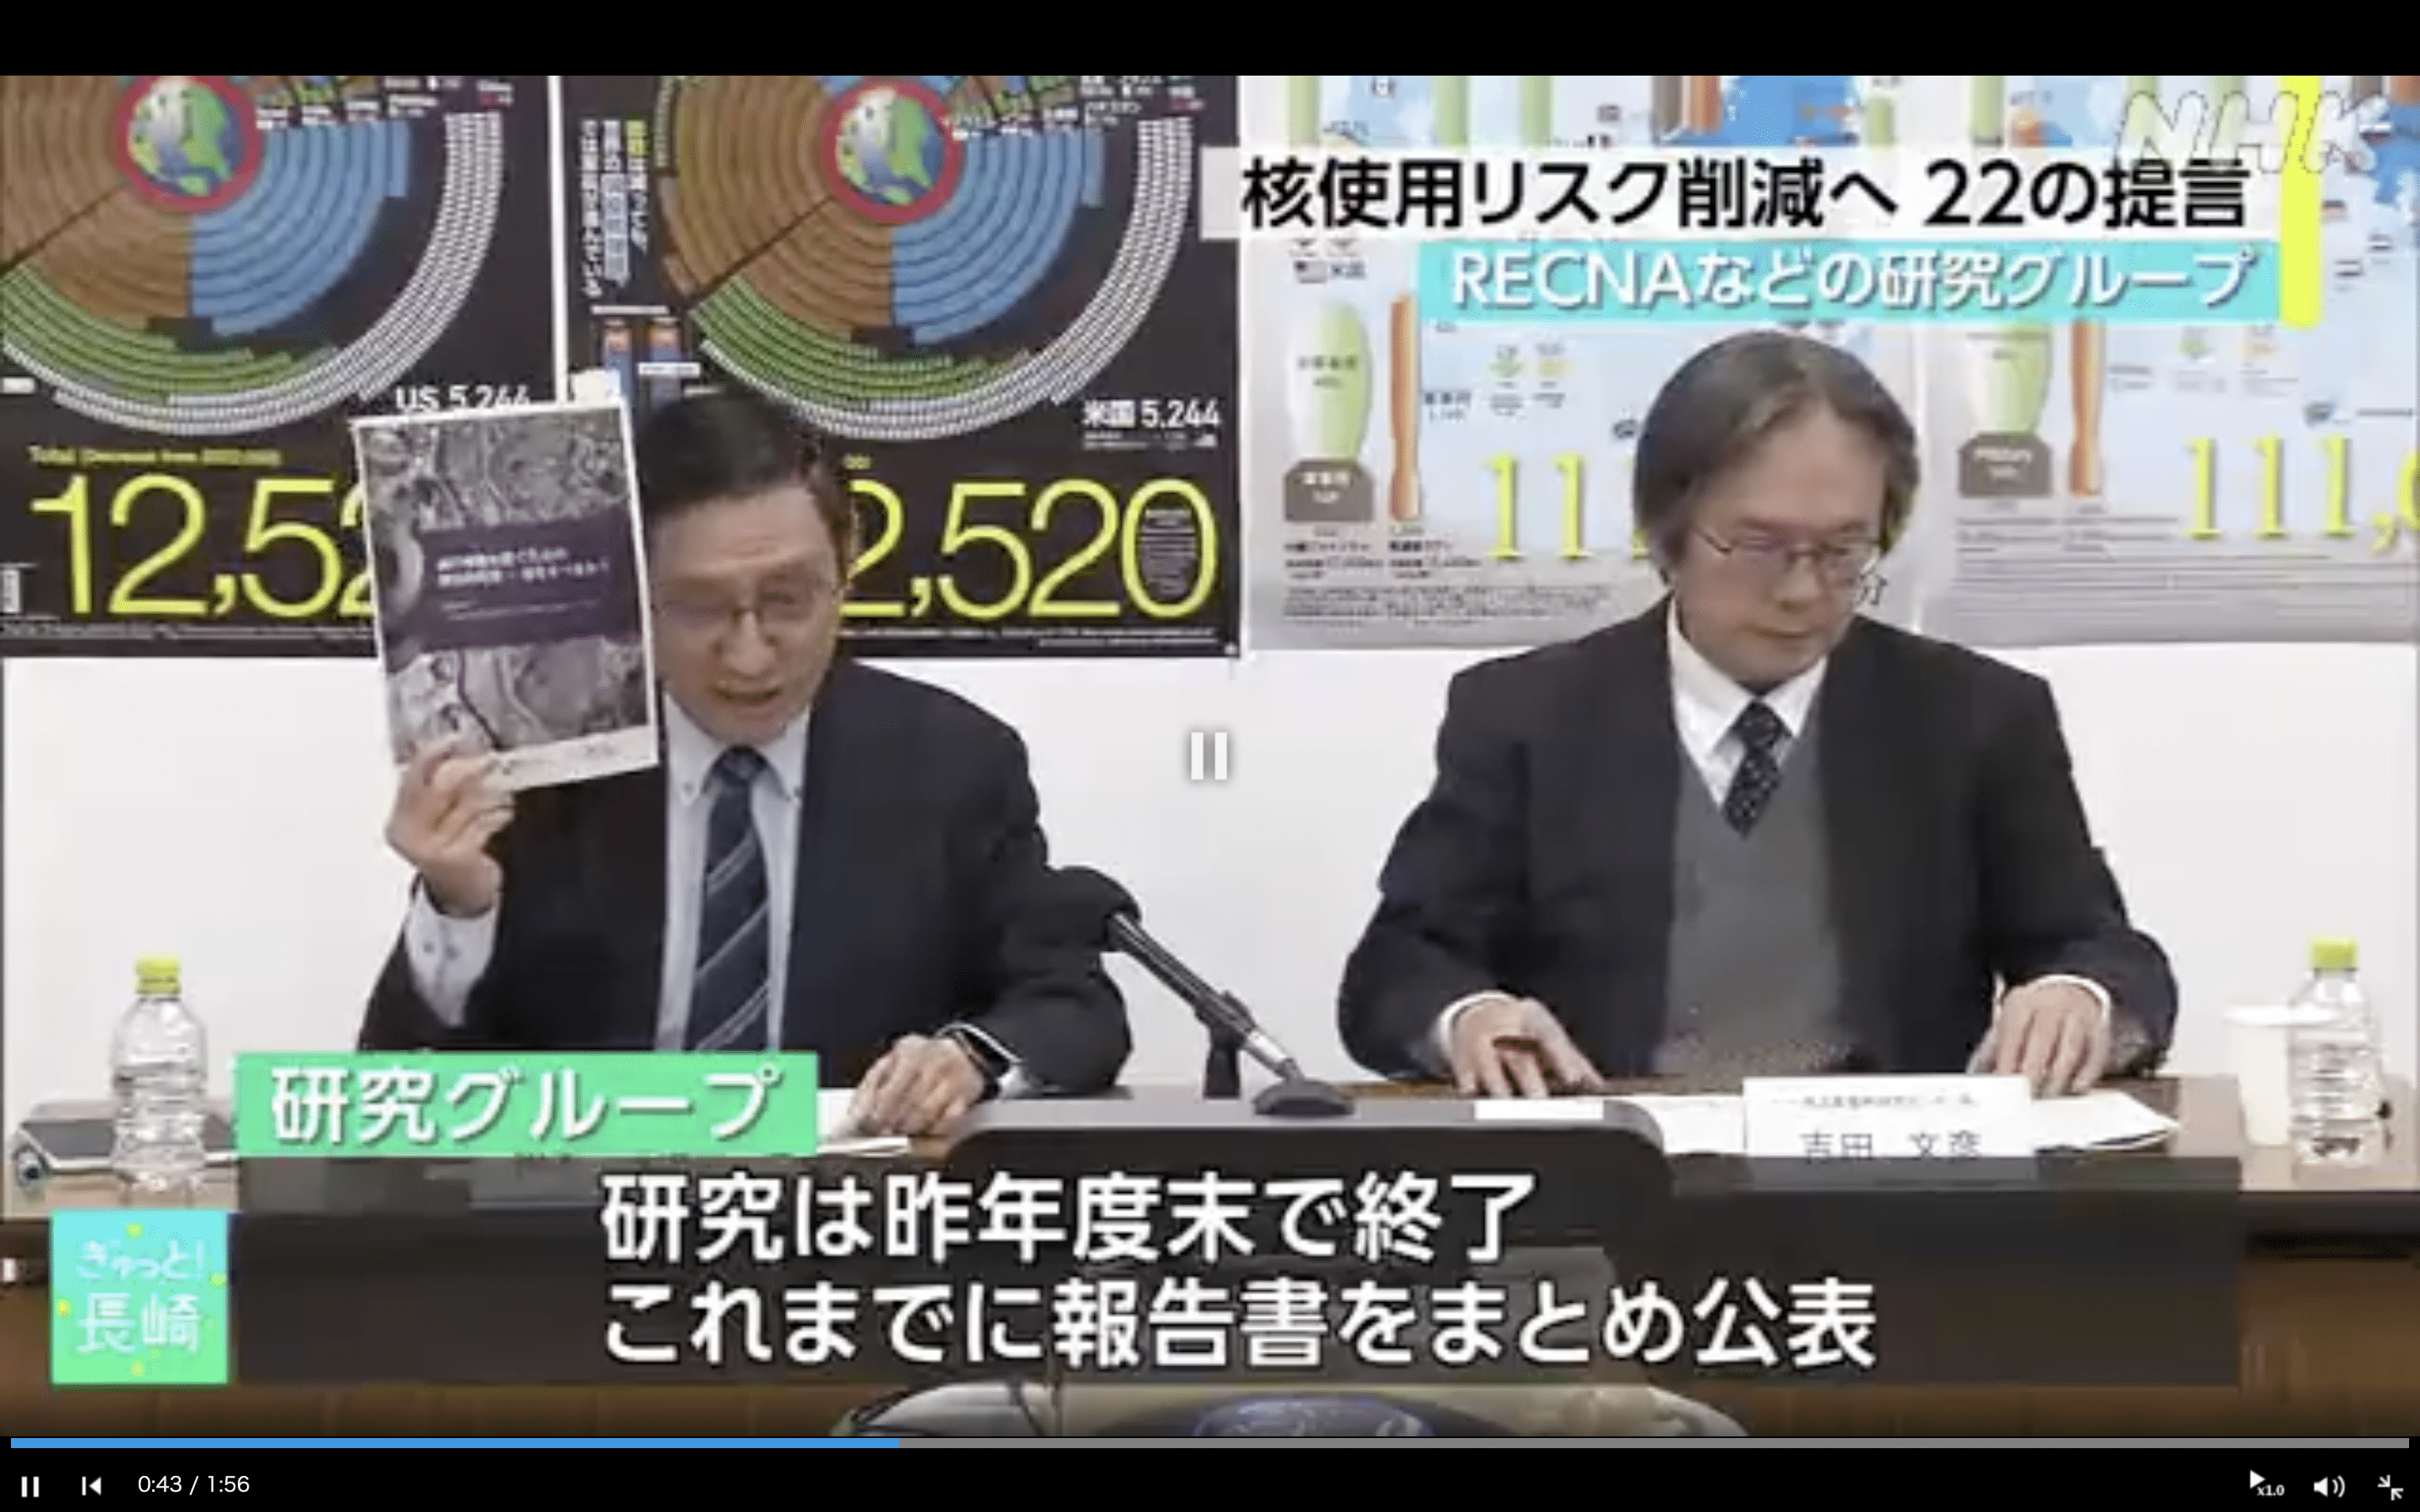 [JPN] 22 Recommendations for Reducing Nuclear Risks by Nagasaki University Research Group